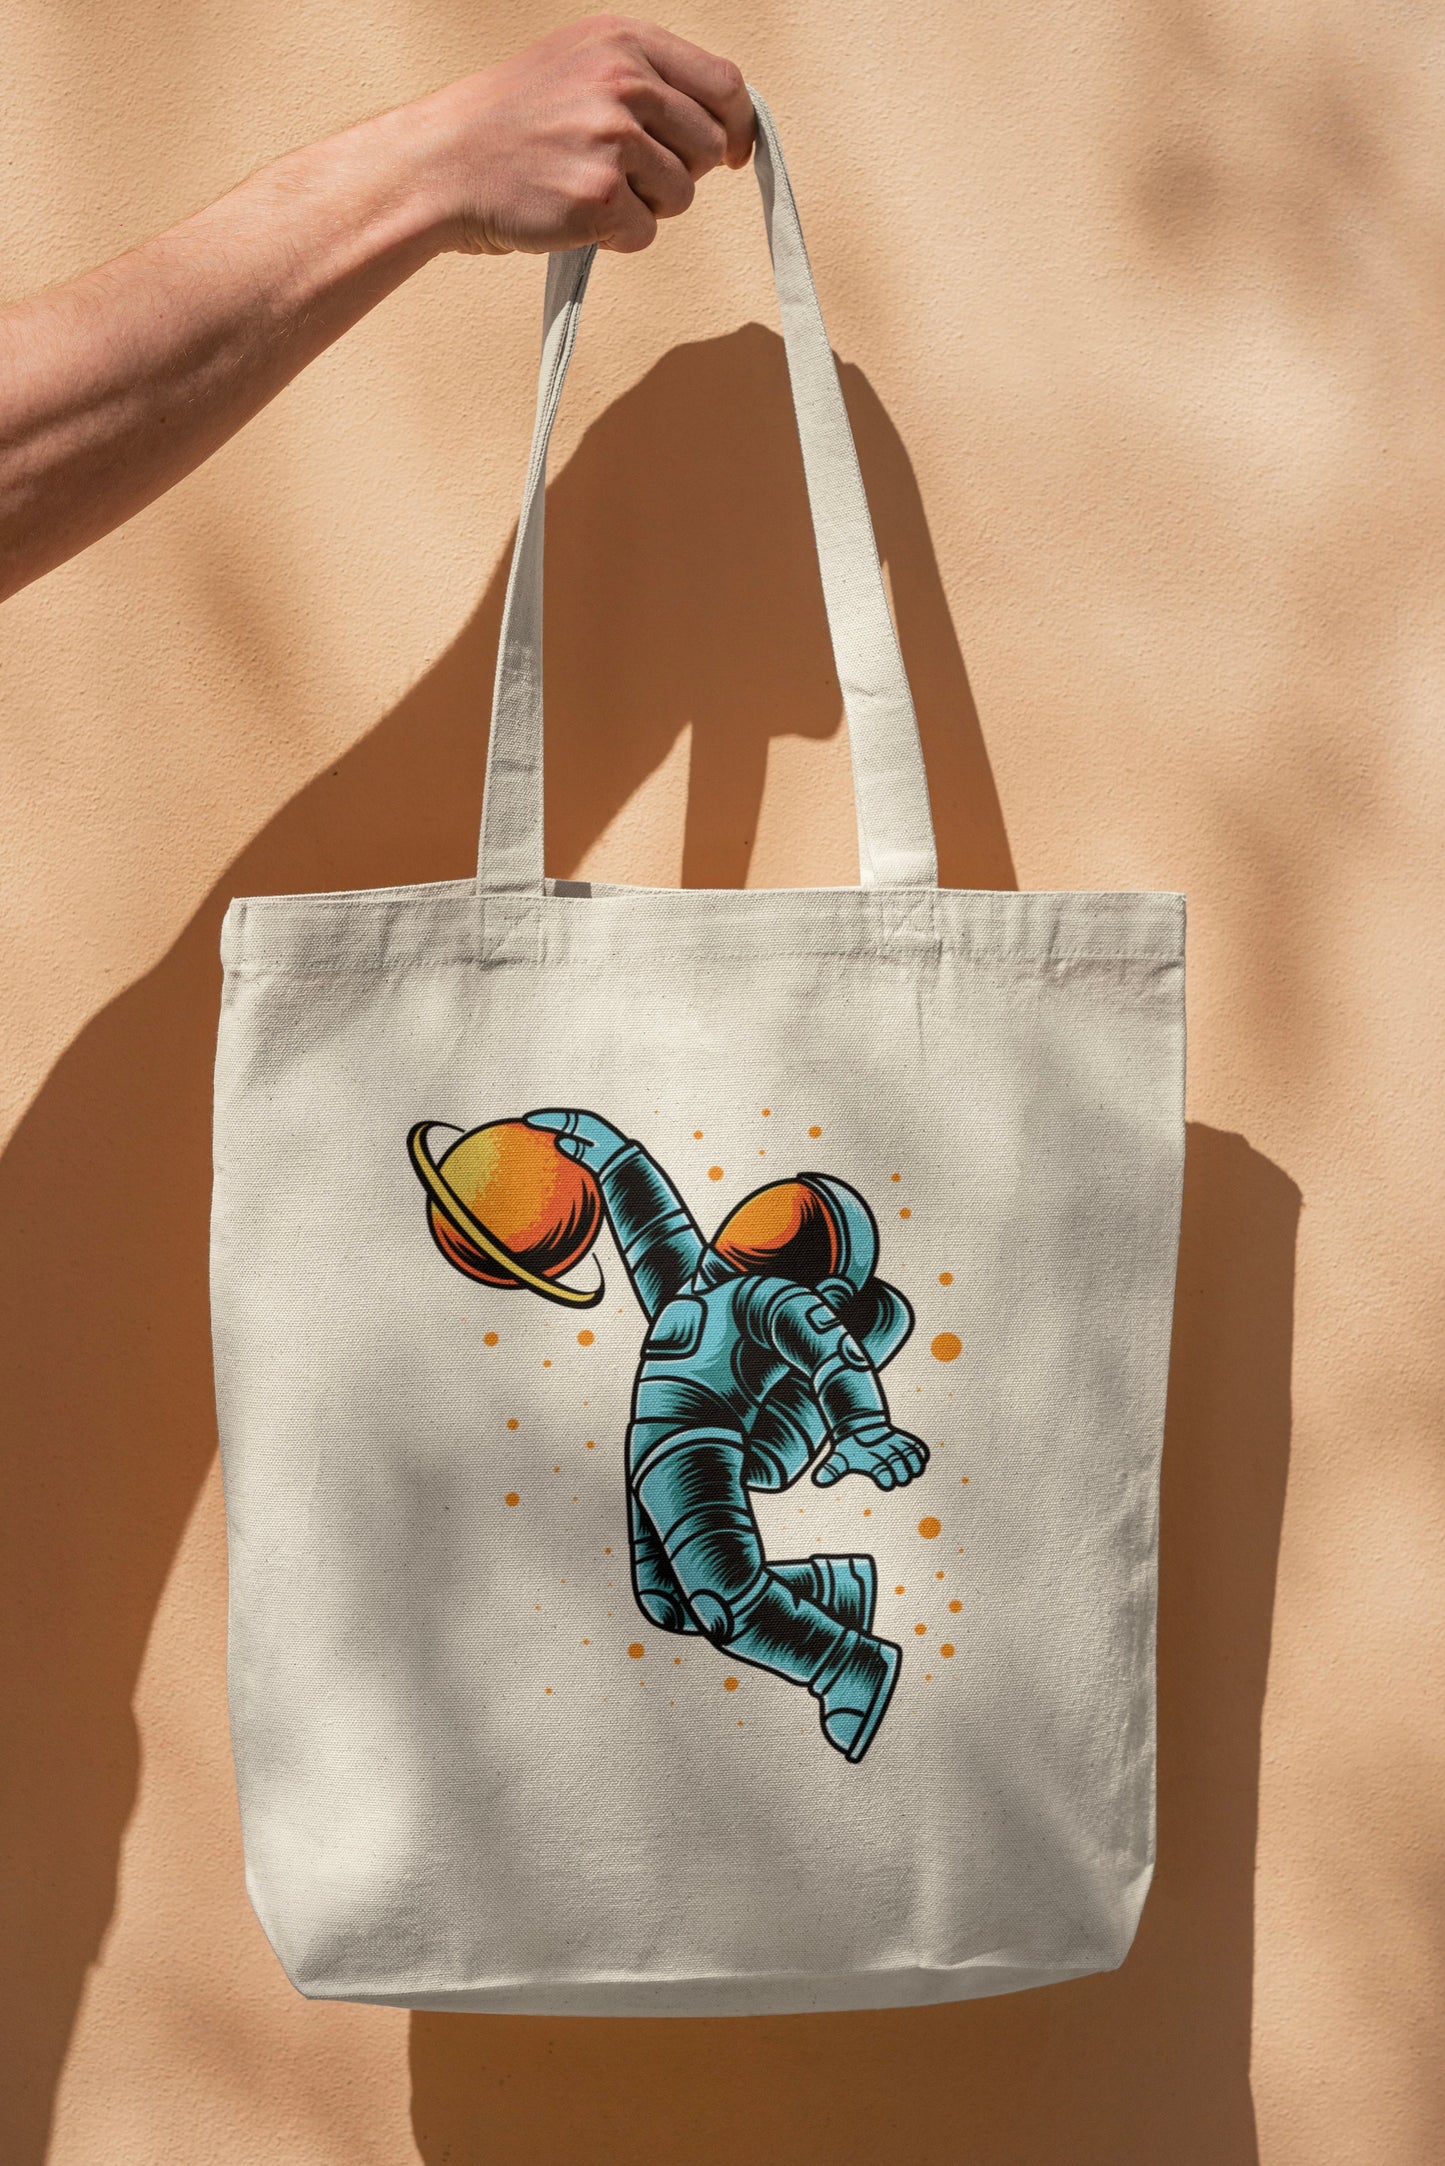 Black/White Flying Astronaut Tote Bag with Zipper